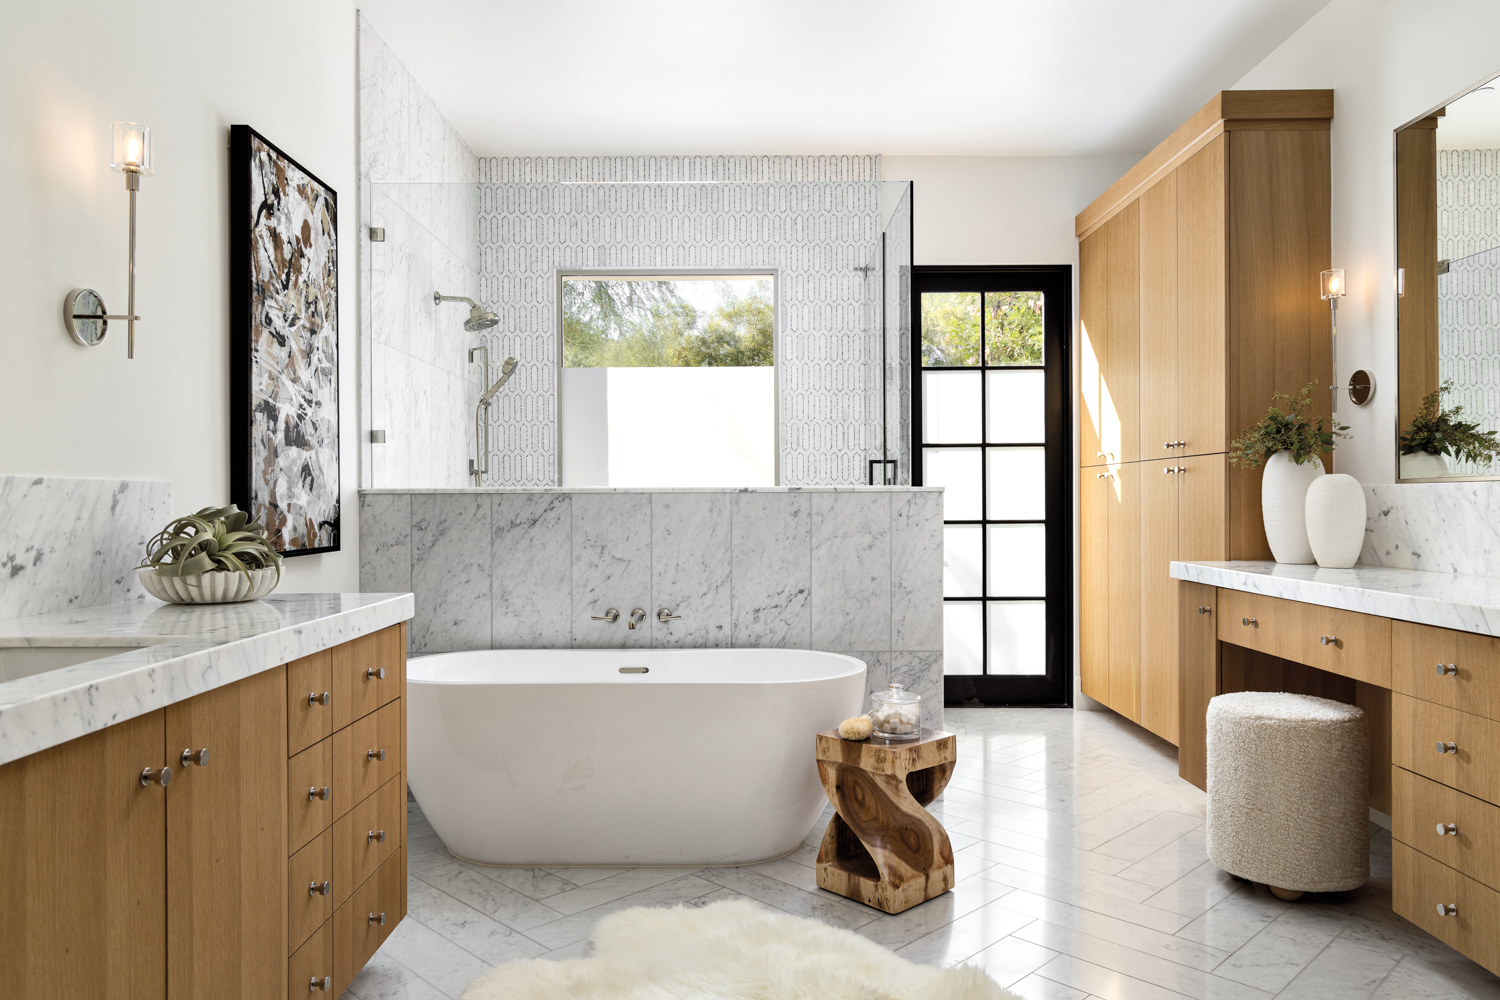 Spa-like bathroom with white oak cabinetry, a freestanding tub and marble floors by Lindsay Kadlick